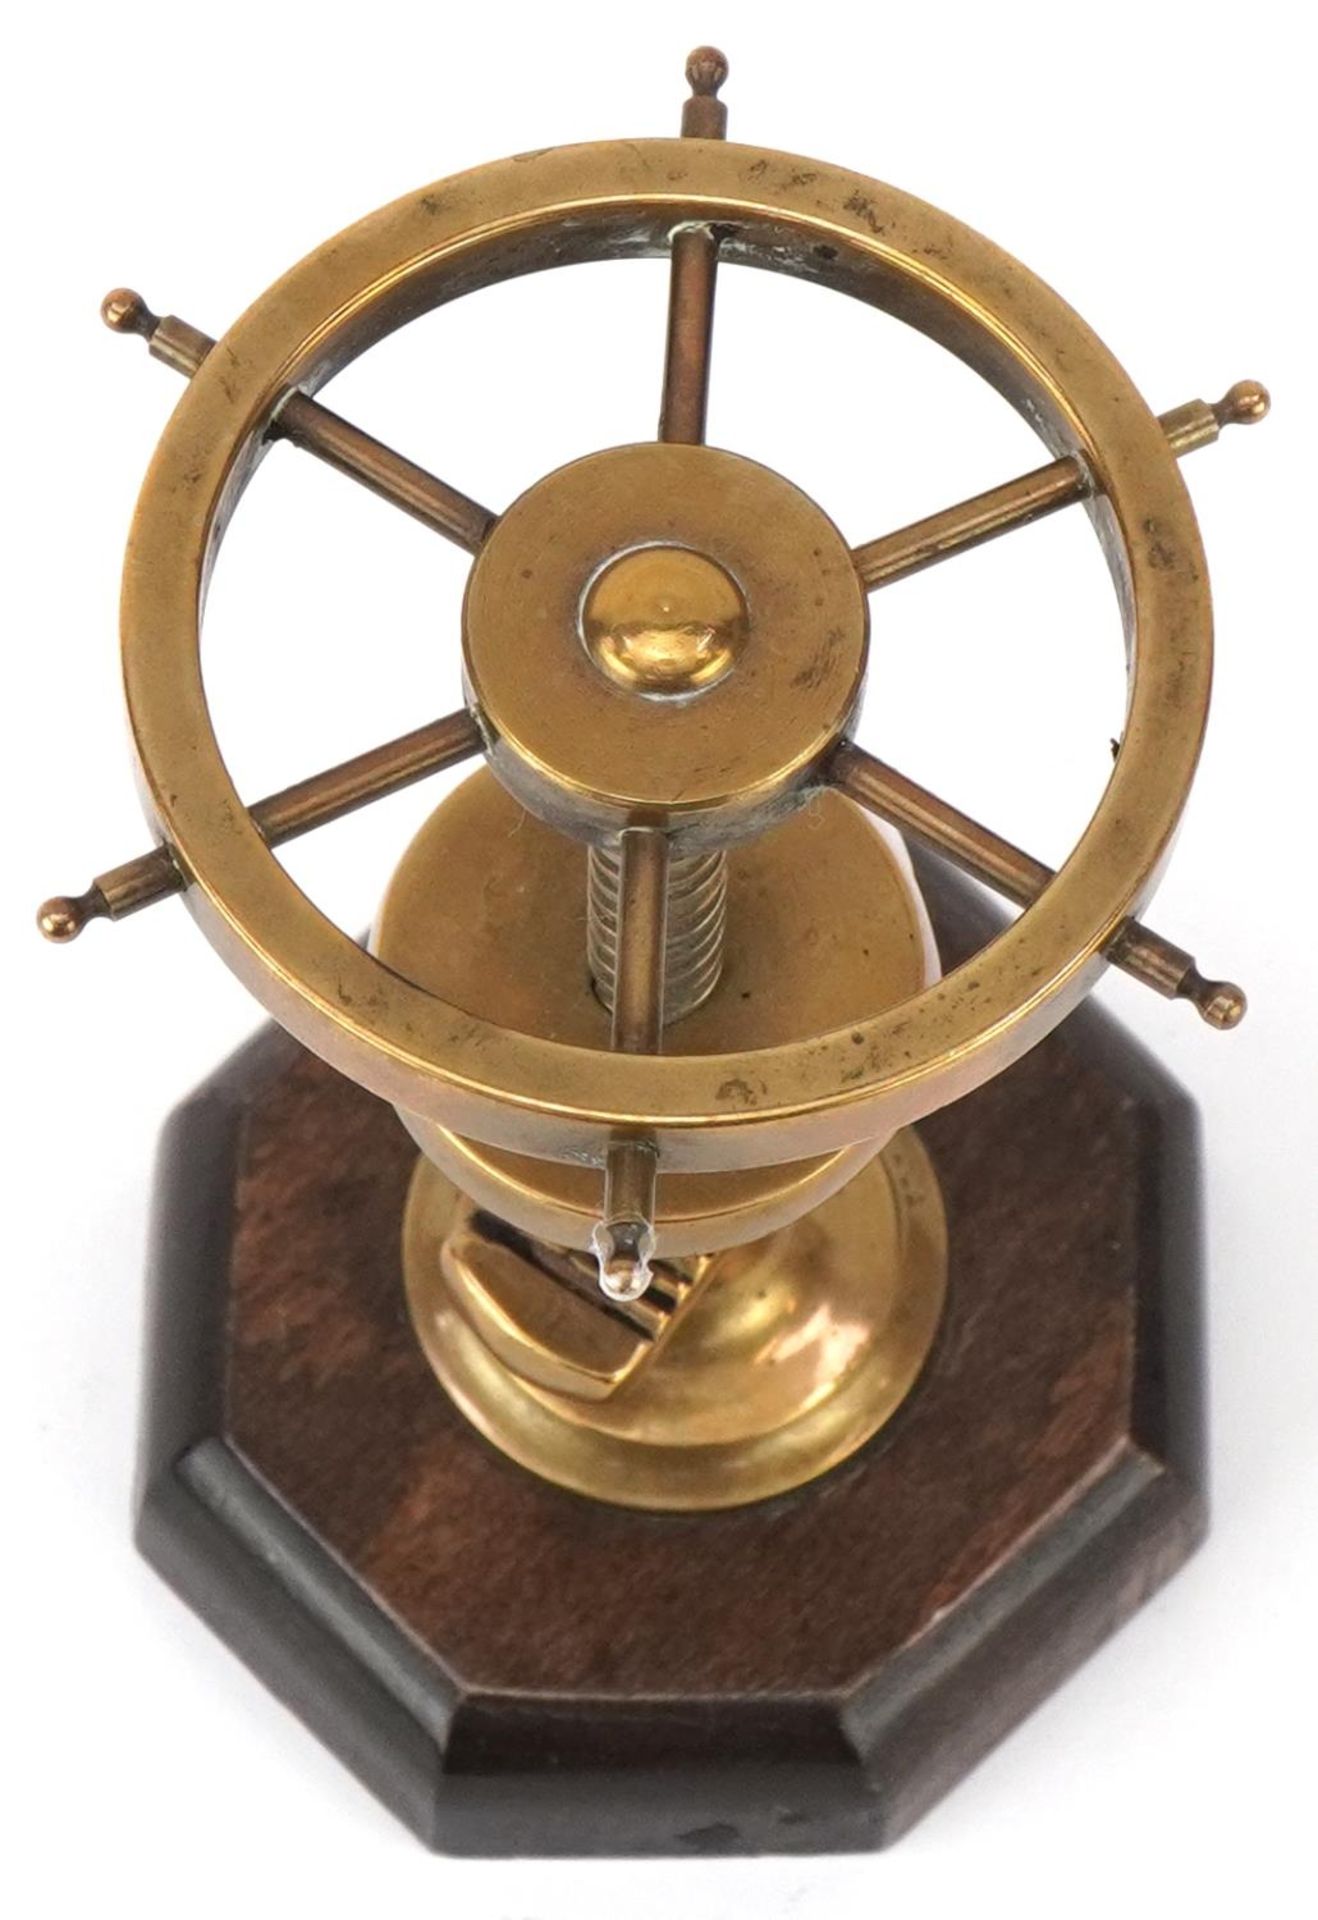 Vintage wooden and brass nutcracker in the form of a ship's wheel, 12cm high - Image 3 of 5